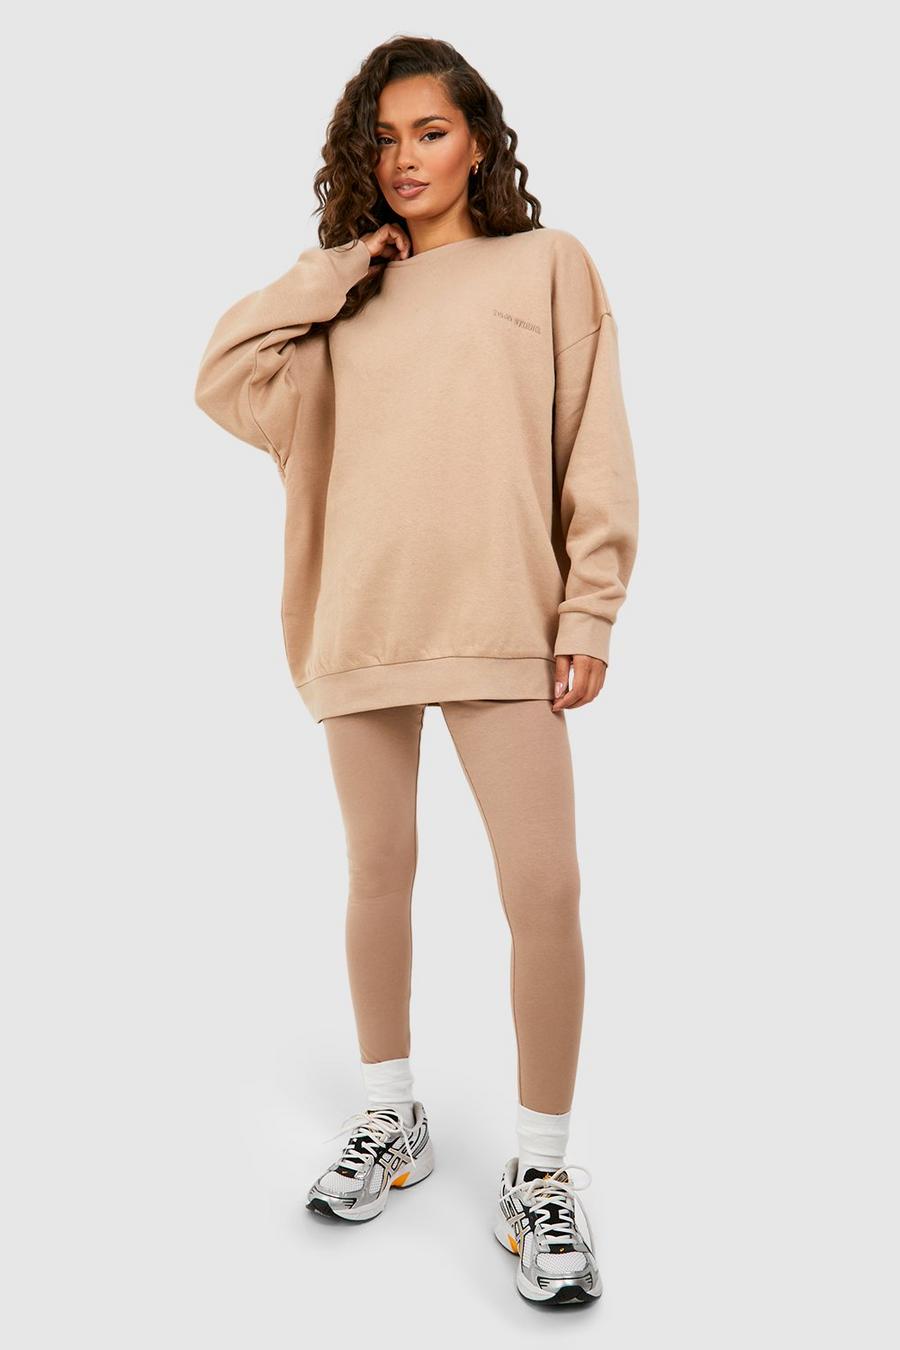 Chándal oversize de leggings y sudadera, Taupe beis